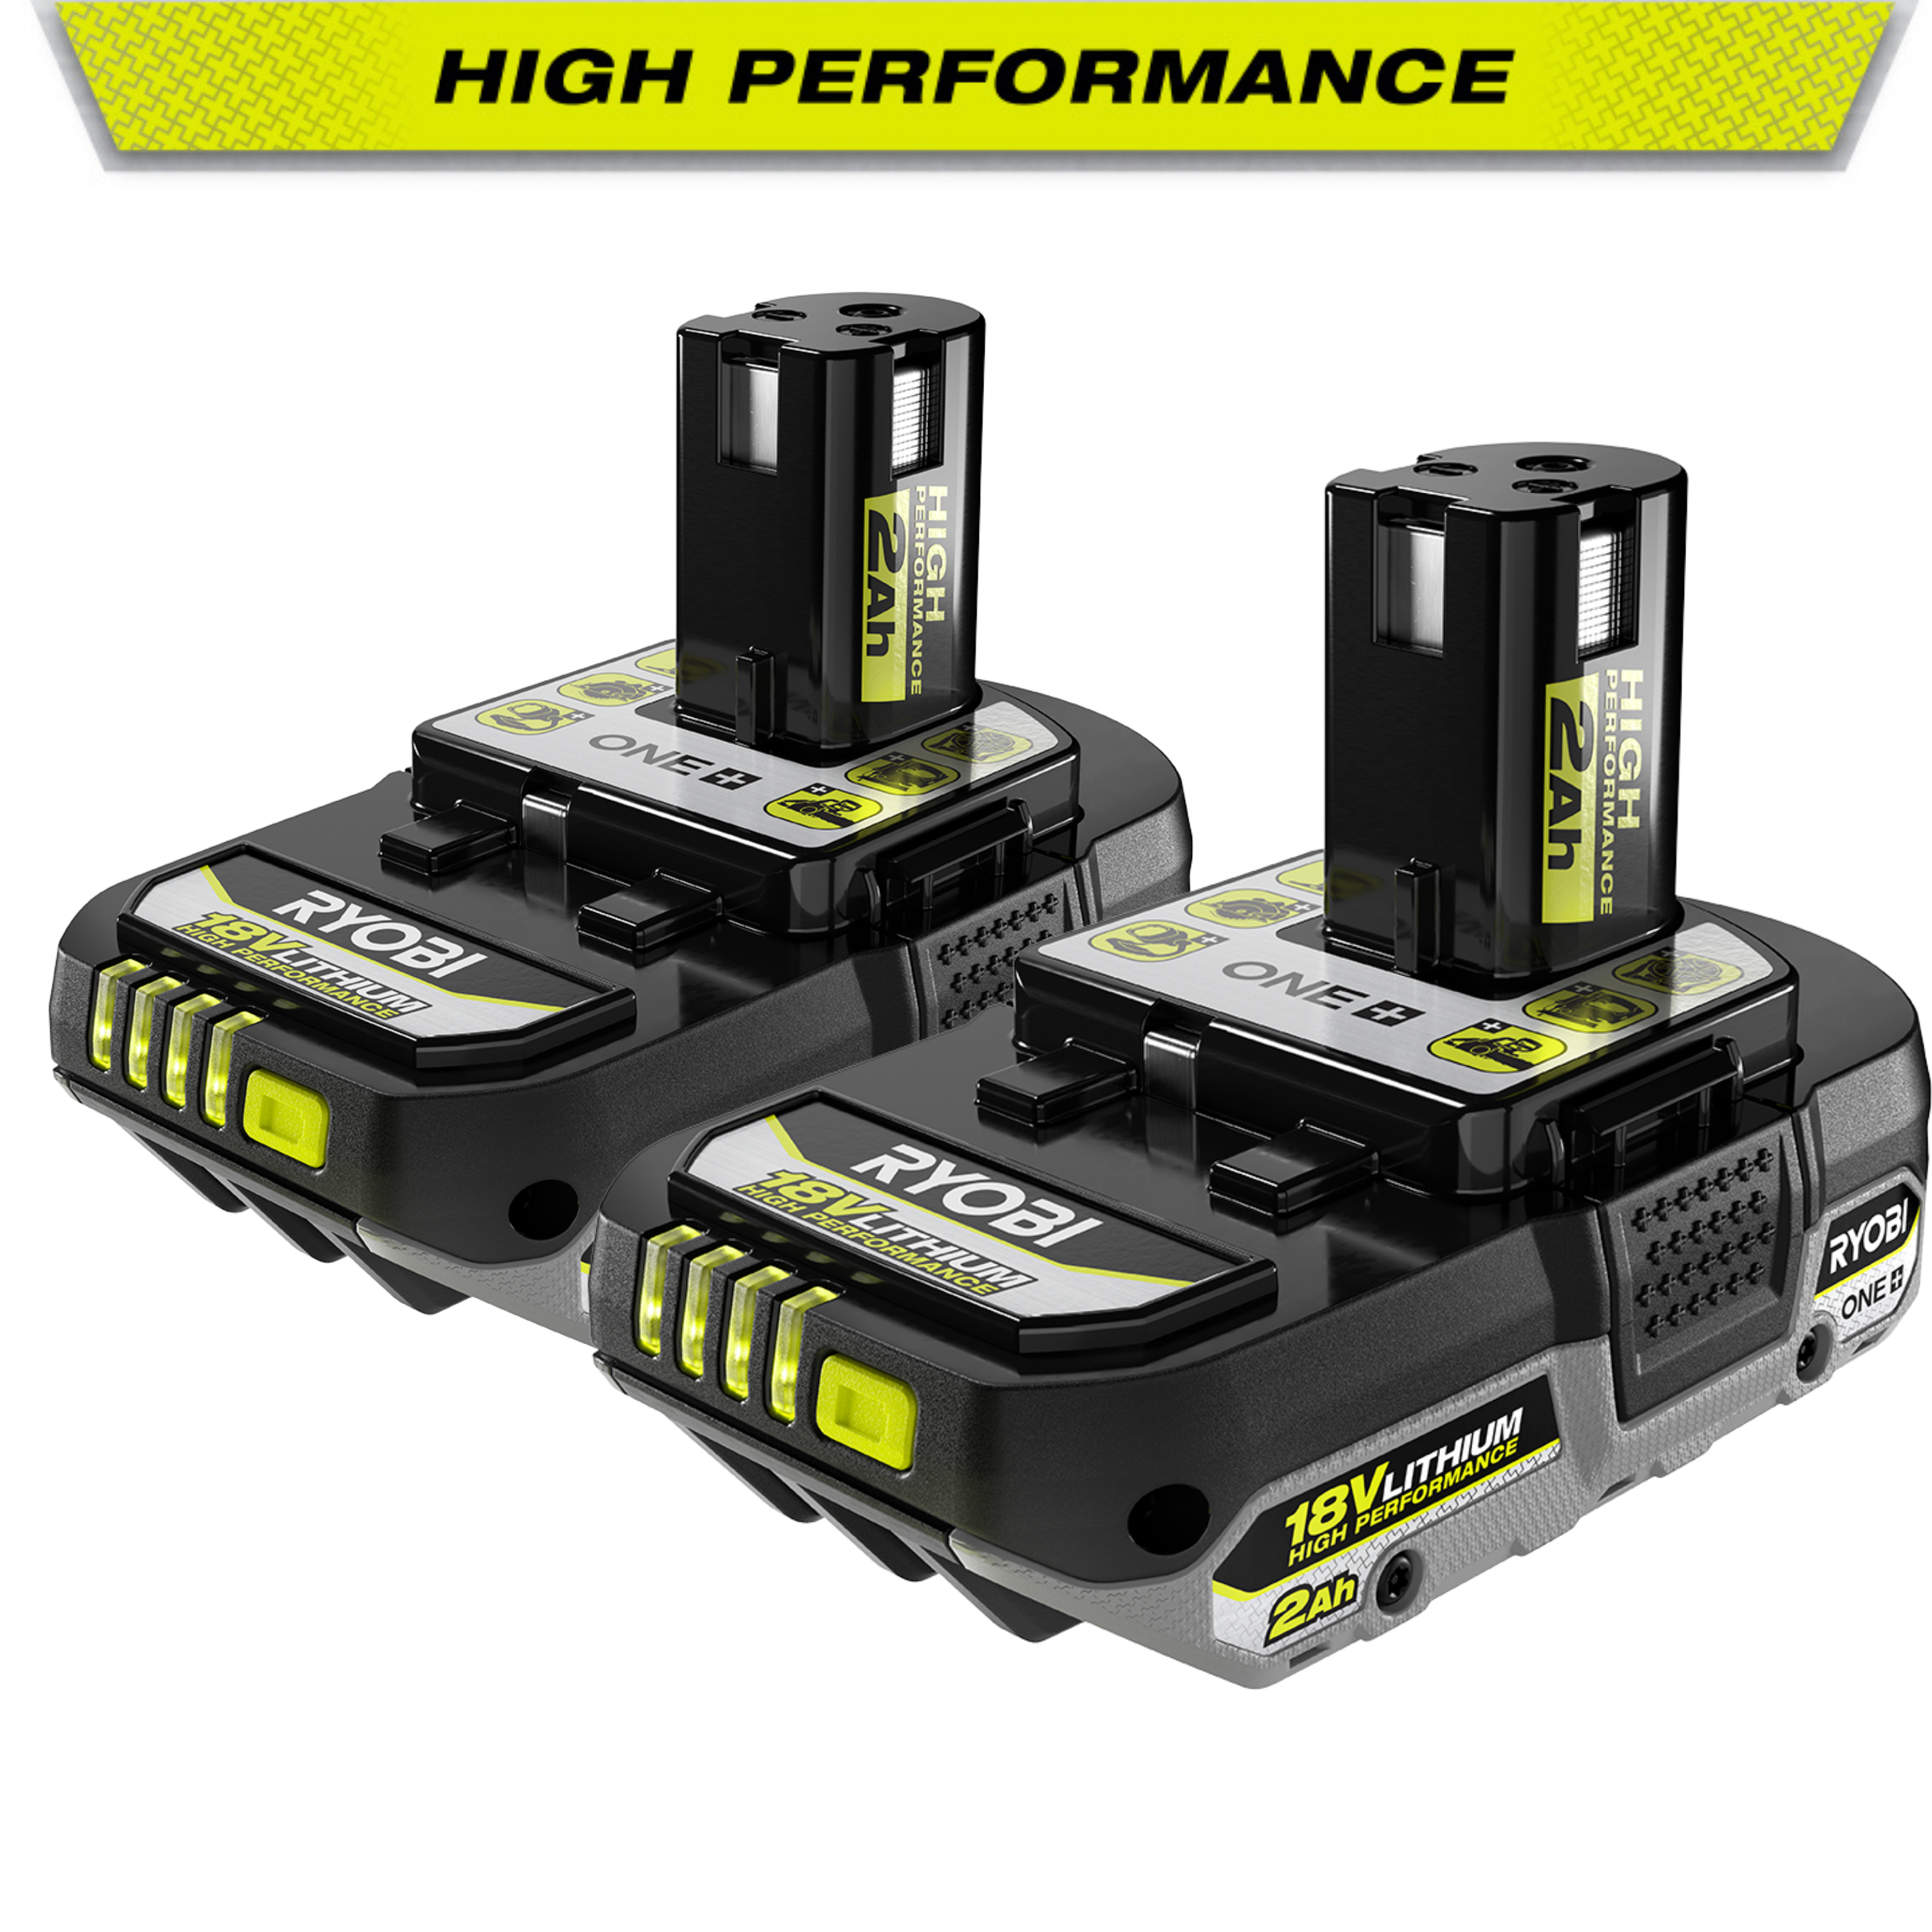 Feature Image for 18V ONE+ 2.0 AH COMPACT HIGH PERFORMANCE BATTERY (2-PACK).